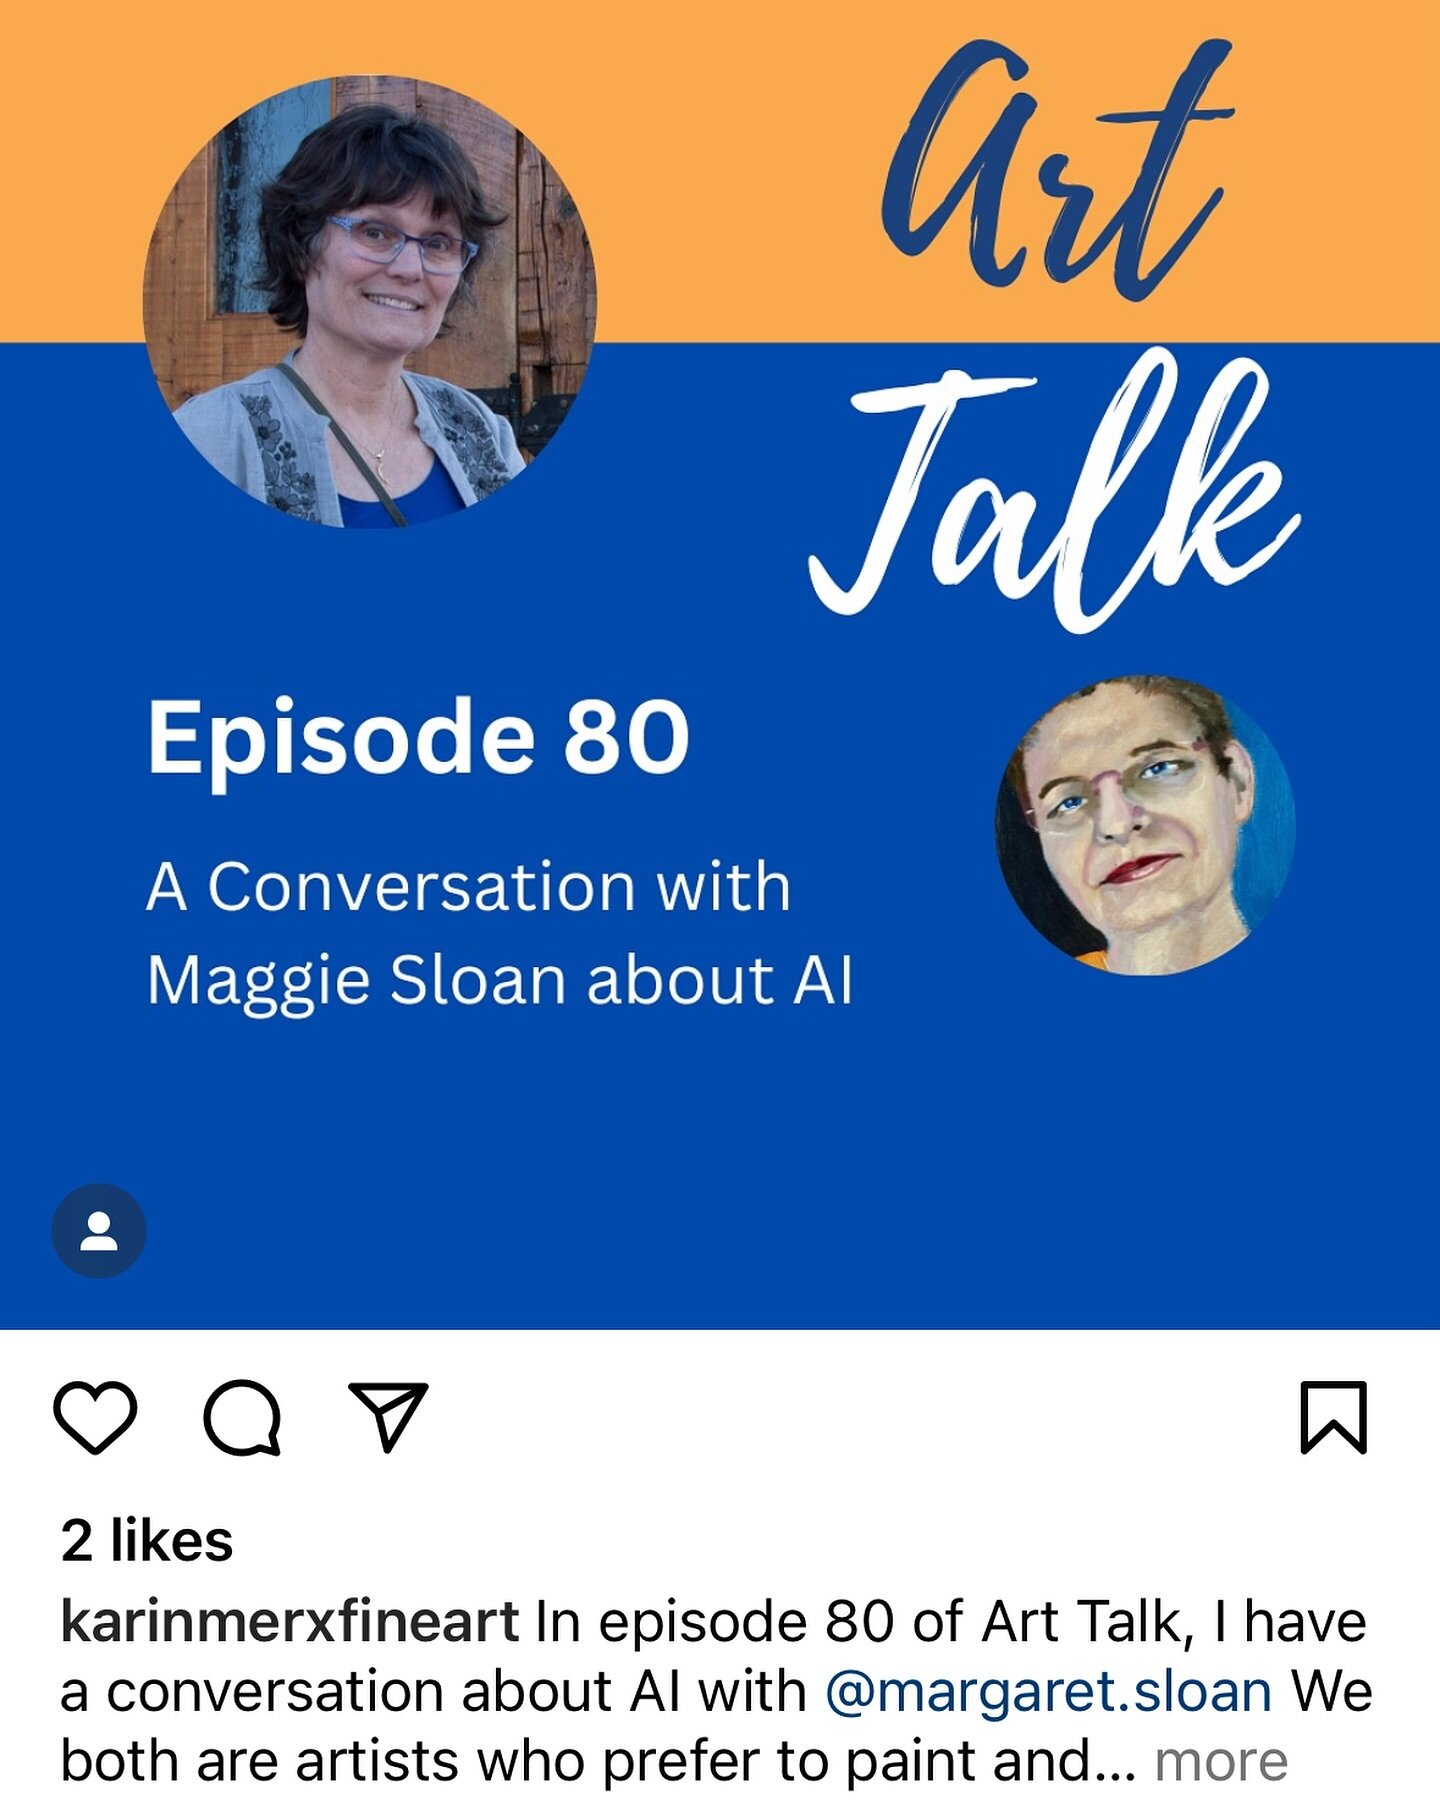 What do you think about ai?  Listen to my conversation with Karin Merx on her ArtTalk podcast and let me know your take on the whole controversial topic. 

#aiart #aicommunity #artbyhumans